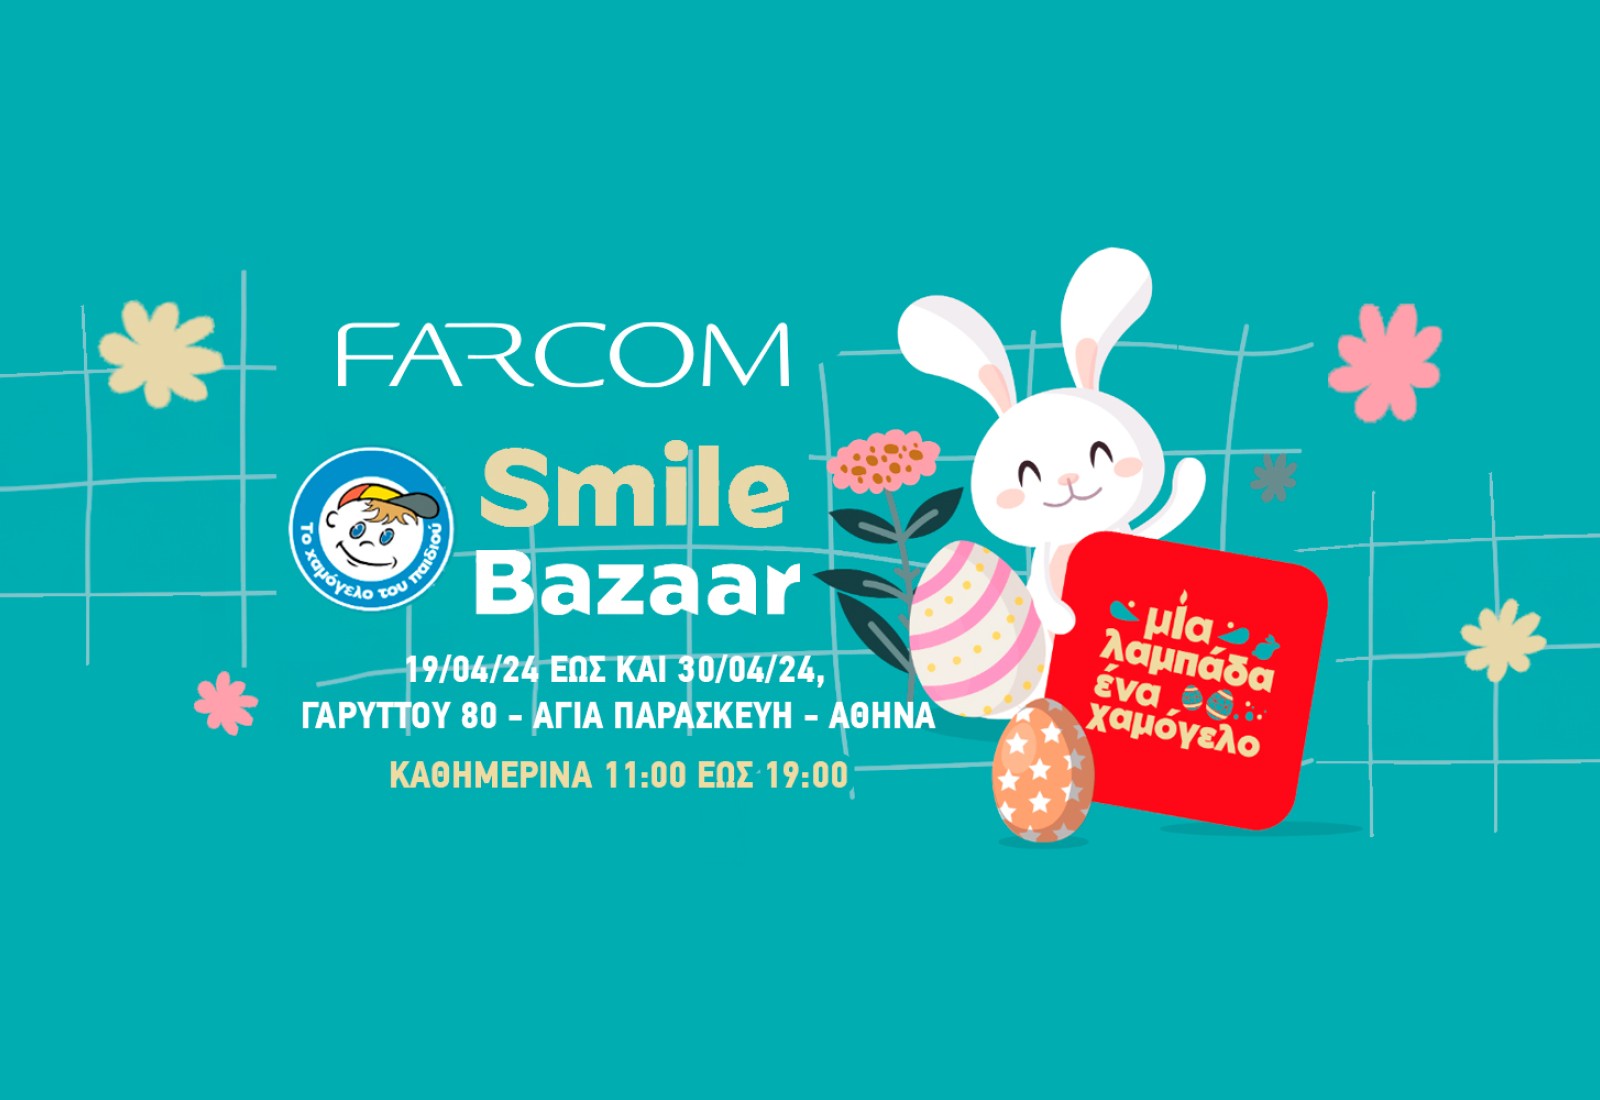 FARCOM participates in the Easter Smile Bazaar organized by The Smile of the Child